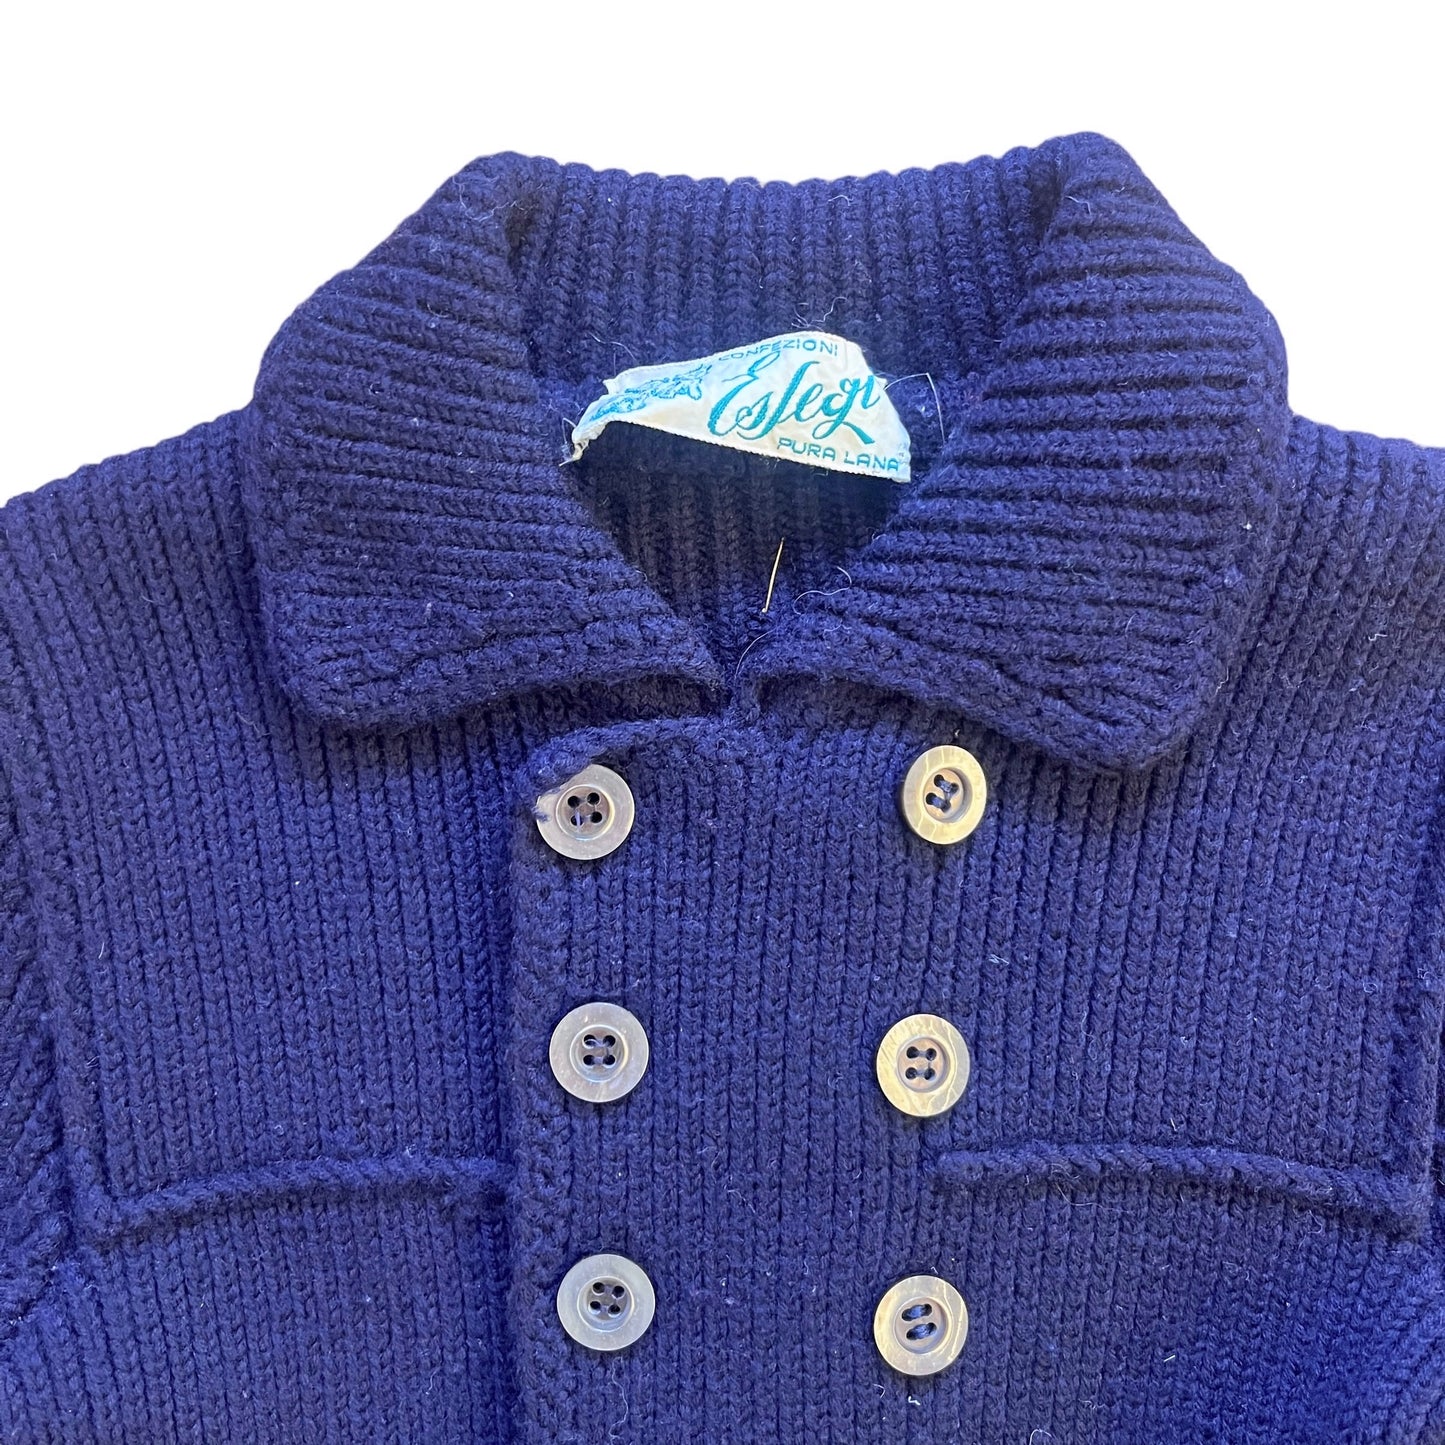 1960's Navy Knitted Jacket / Cardigan 18-24 Months